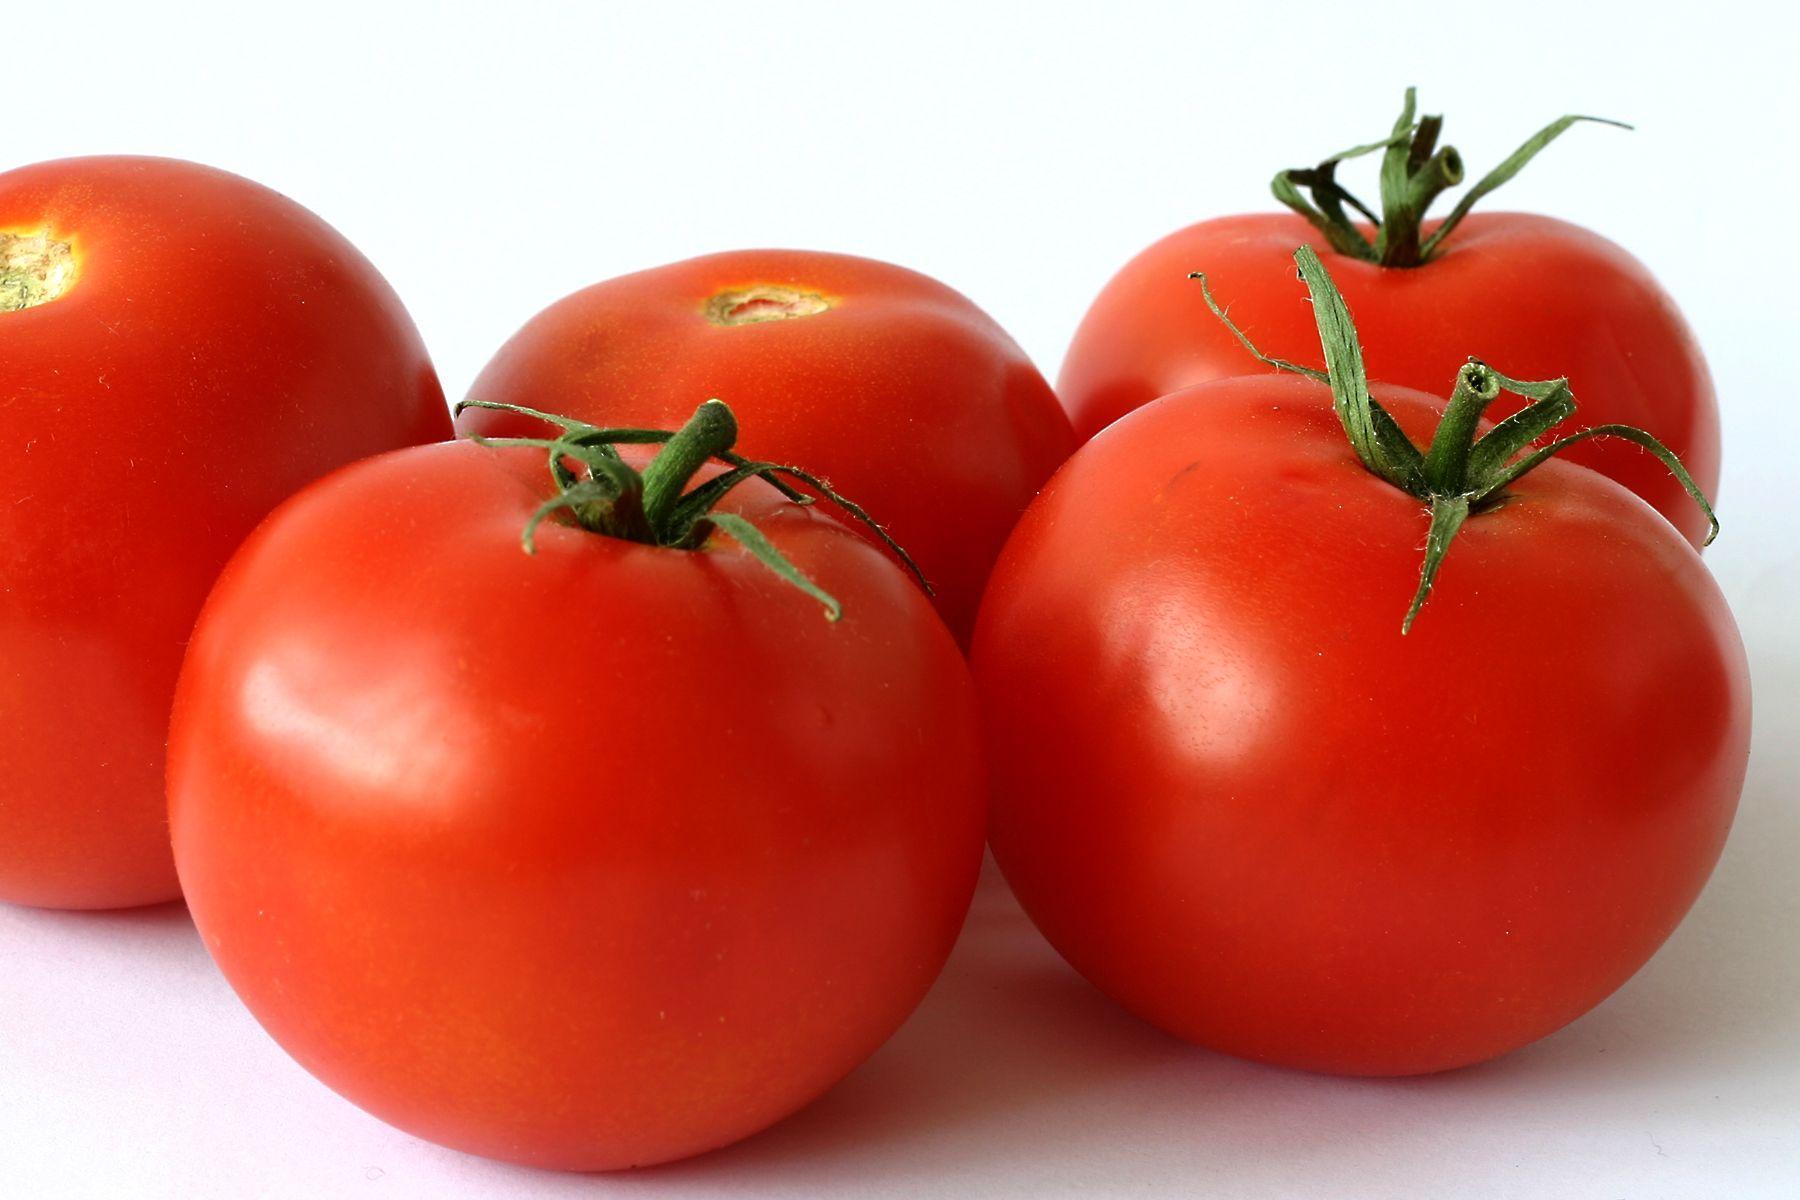 High Quality Tomato Wallpaper. Full HD Picture